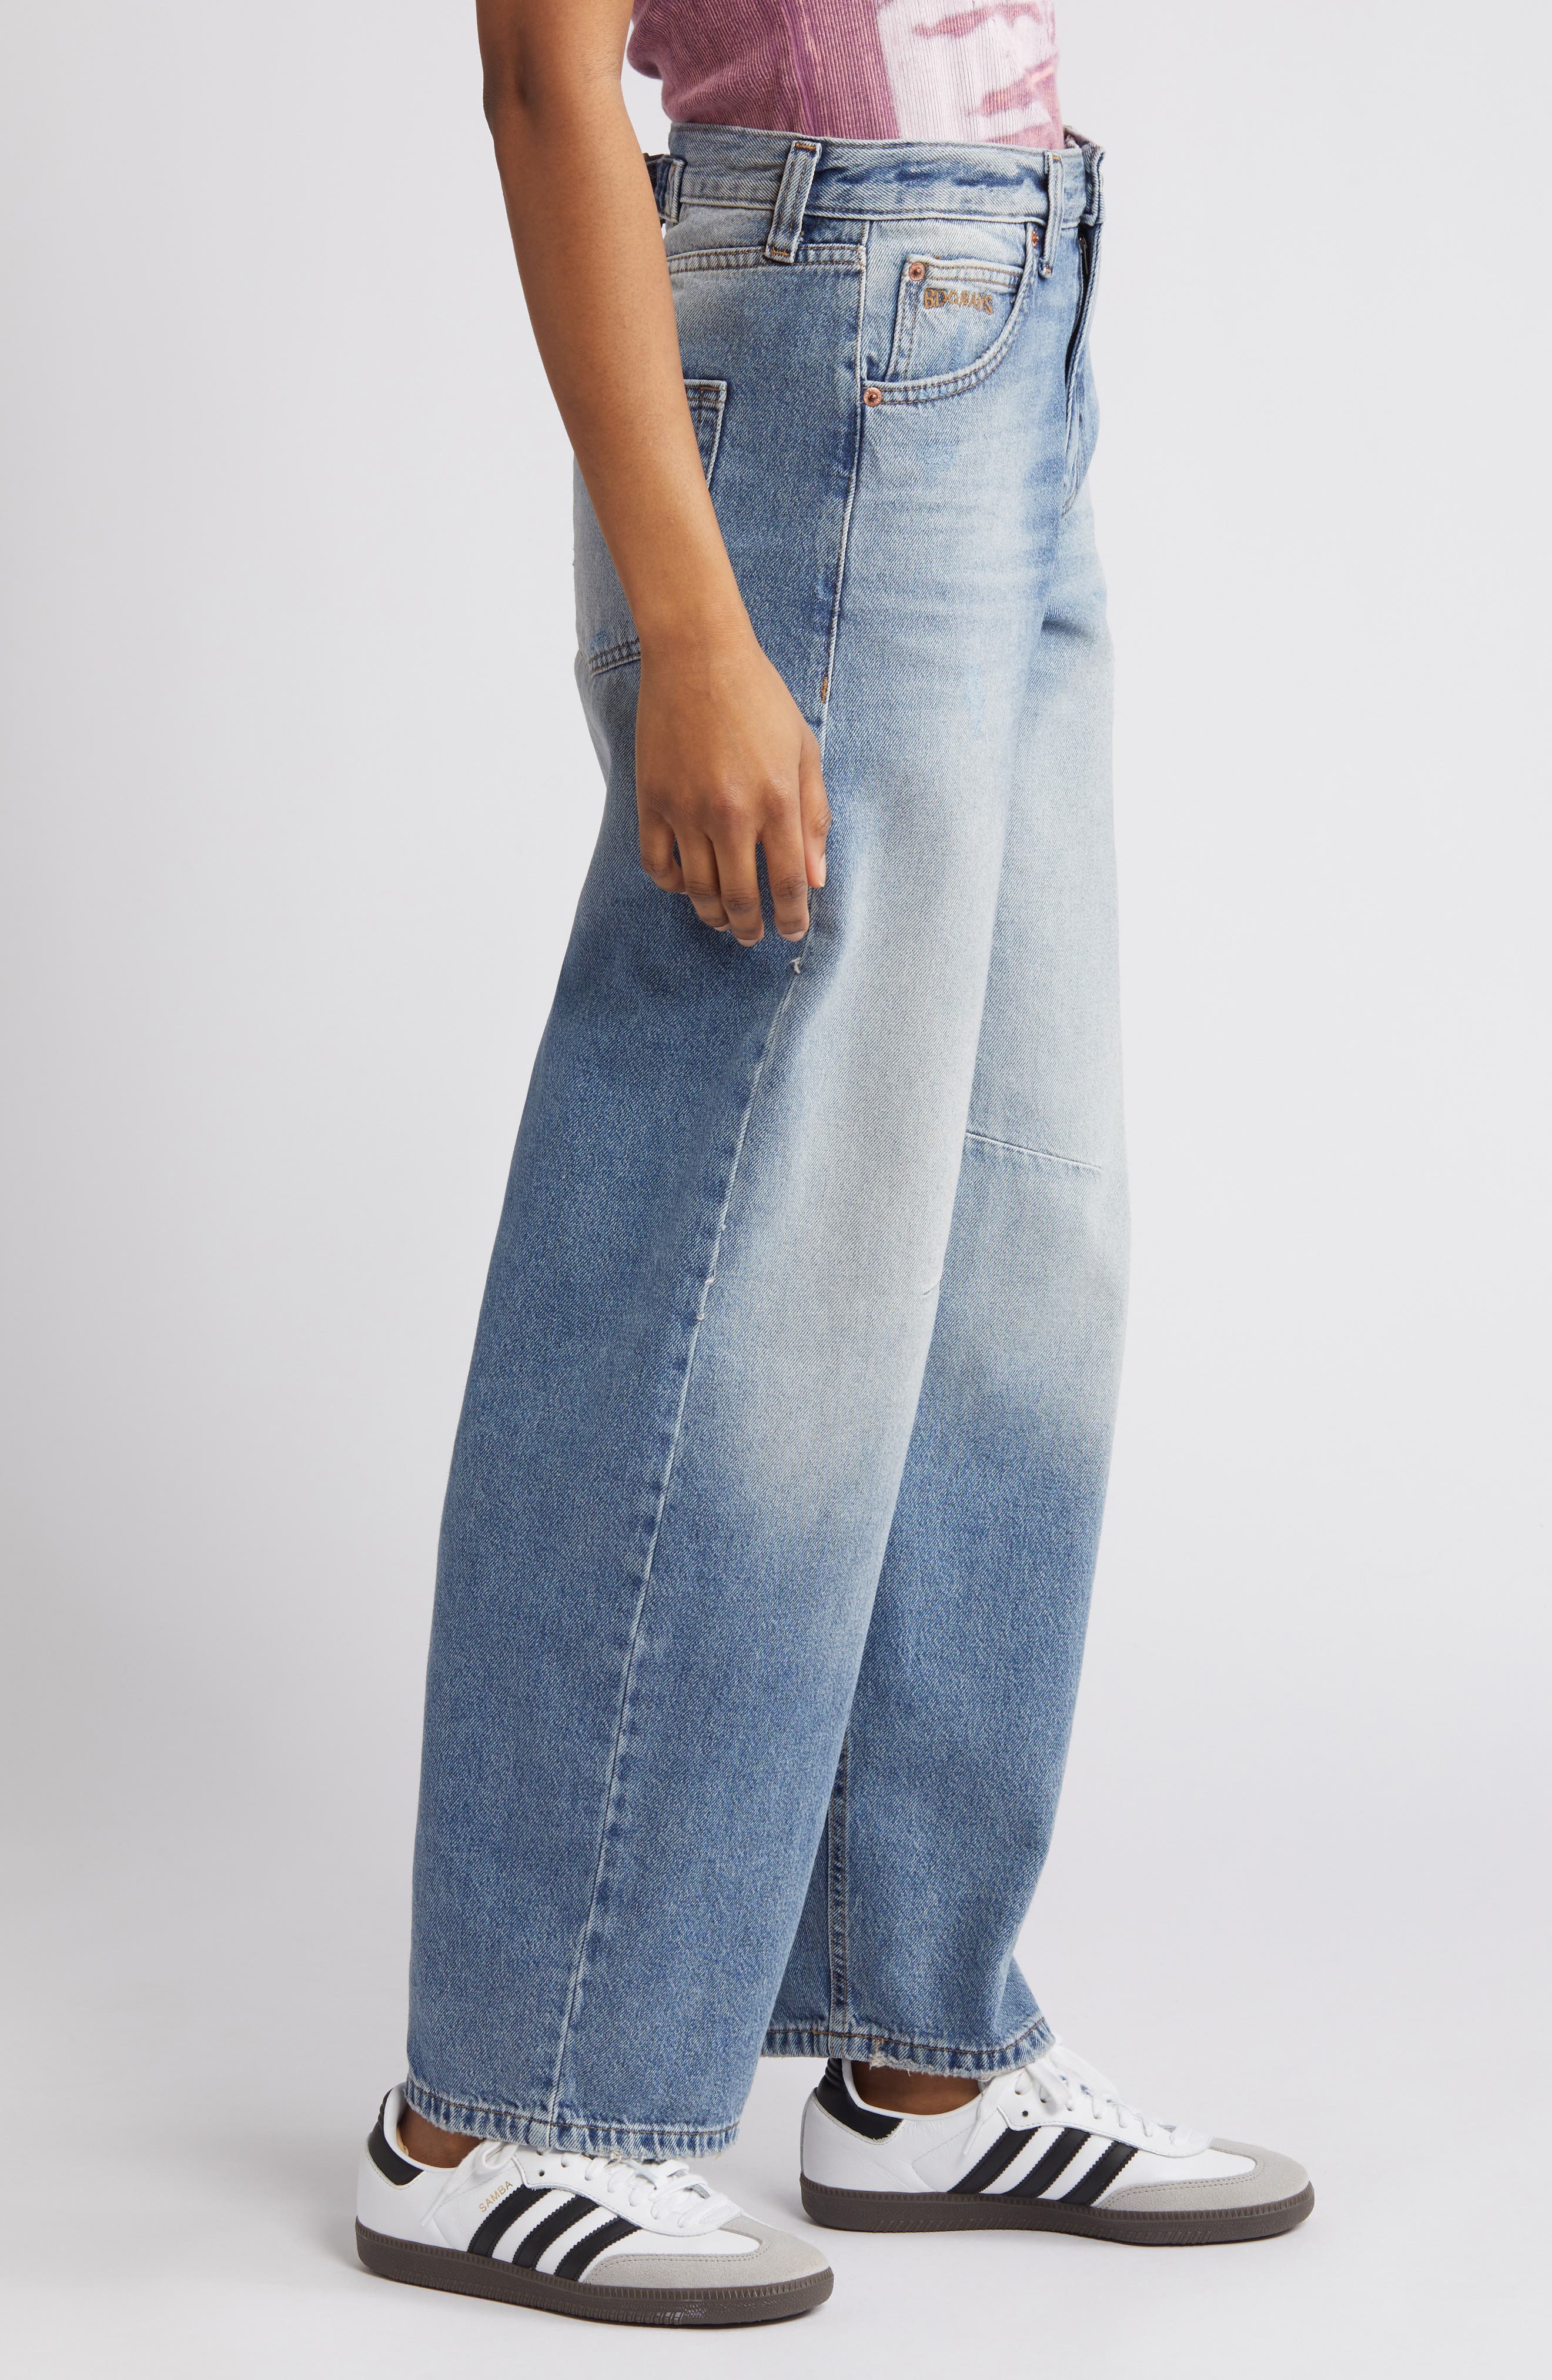 BDG Urban Outfitters Logan Mid Vintage Barrel Jeans